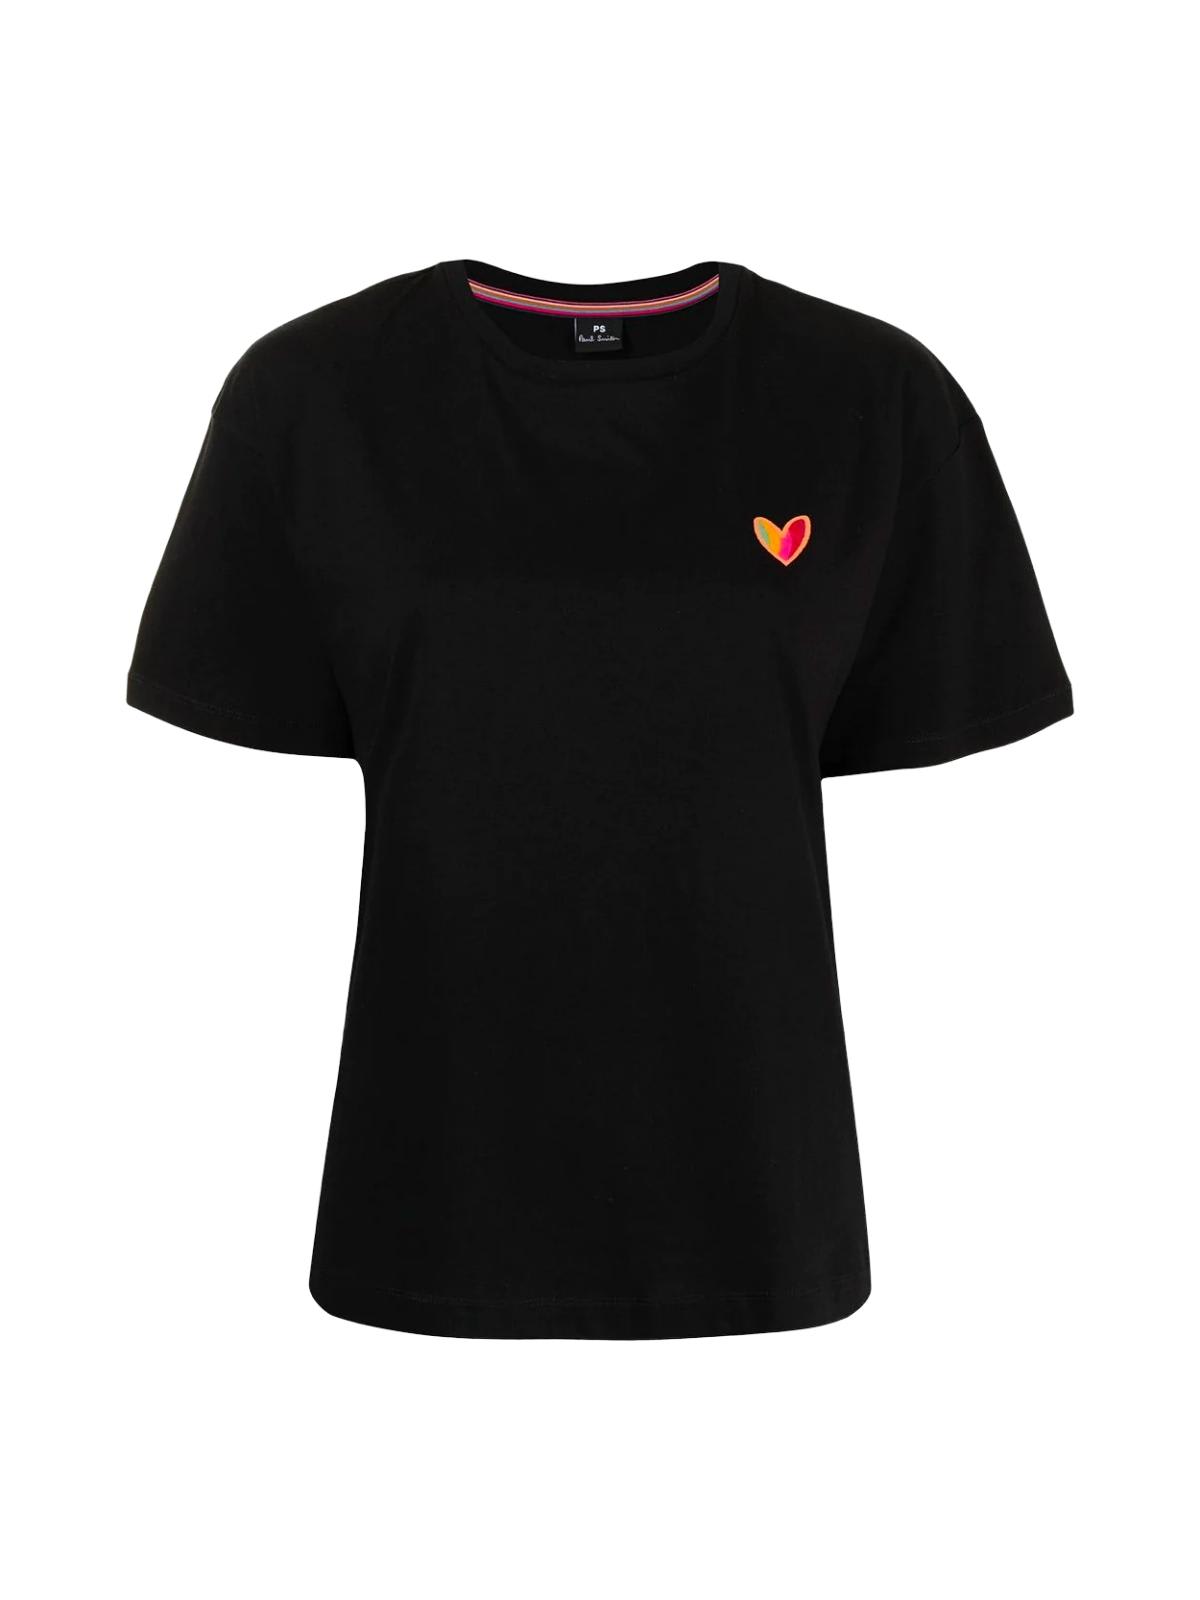 PS by Paul Smith T-shirt With Heart